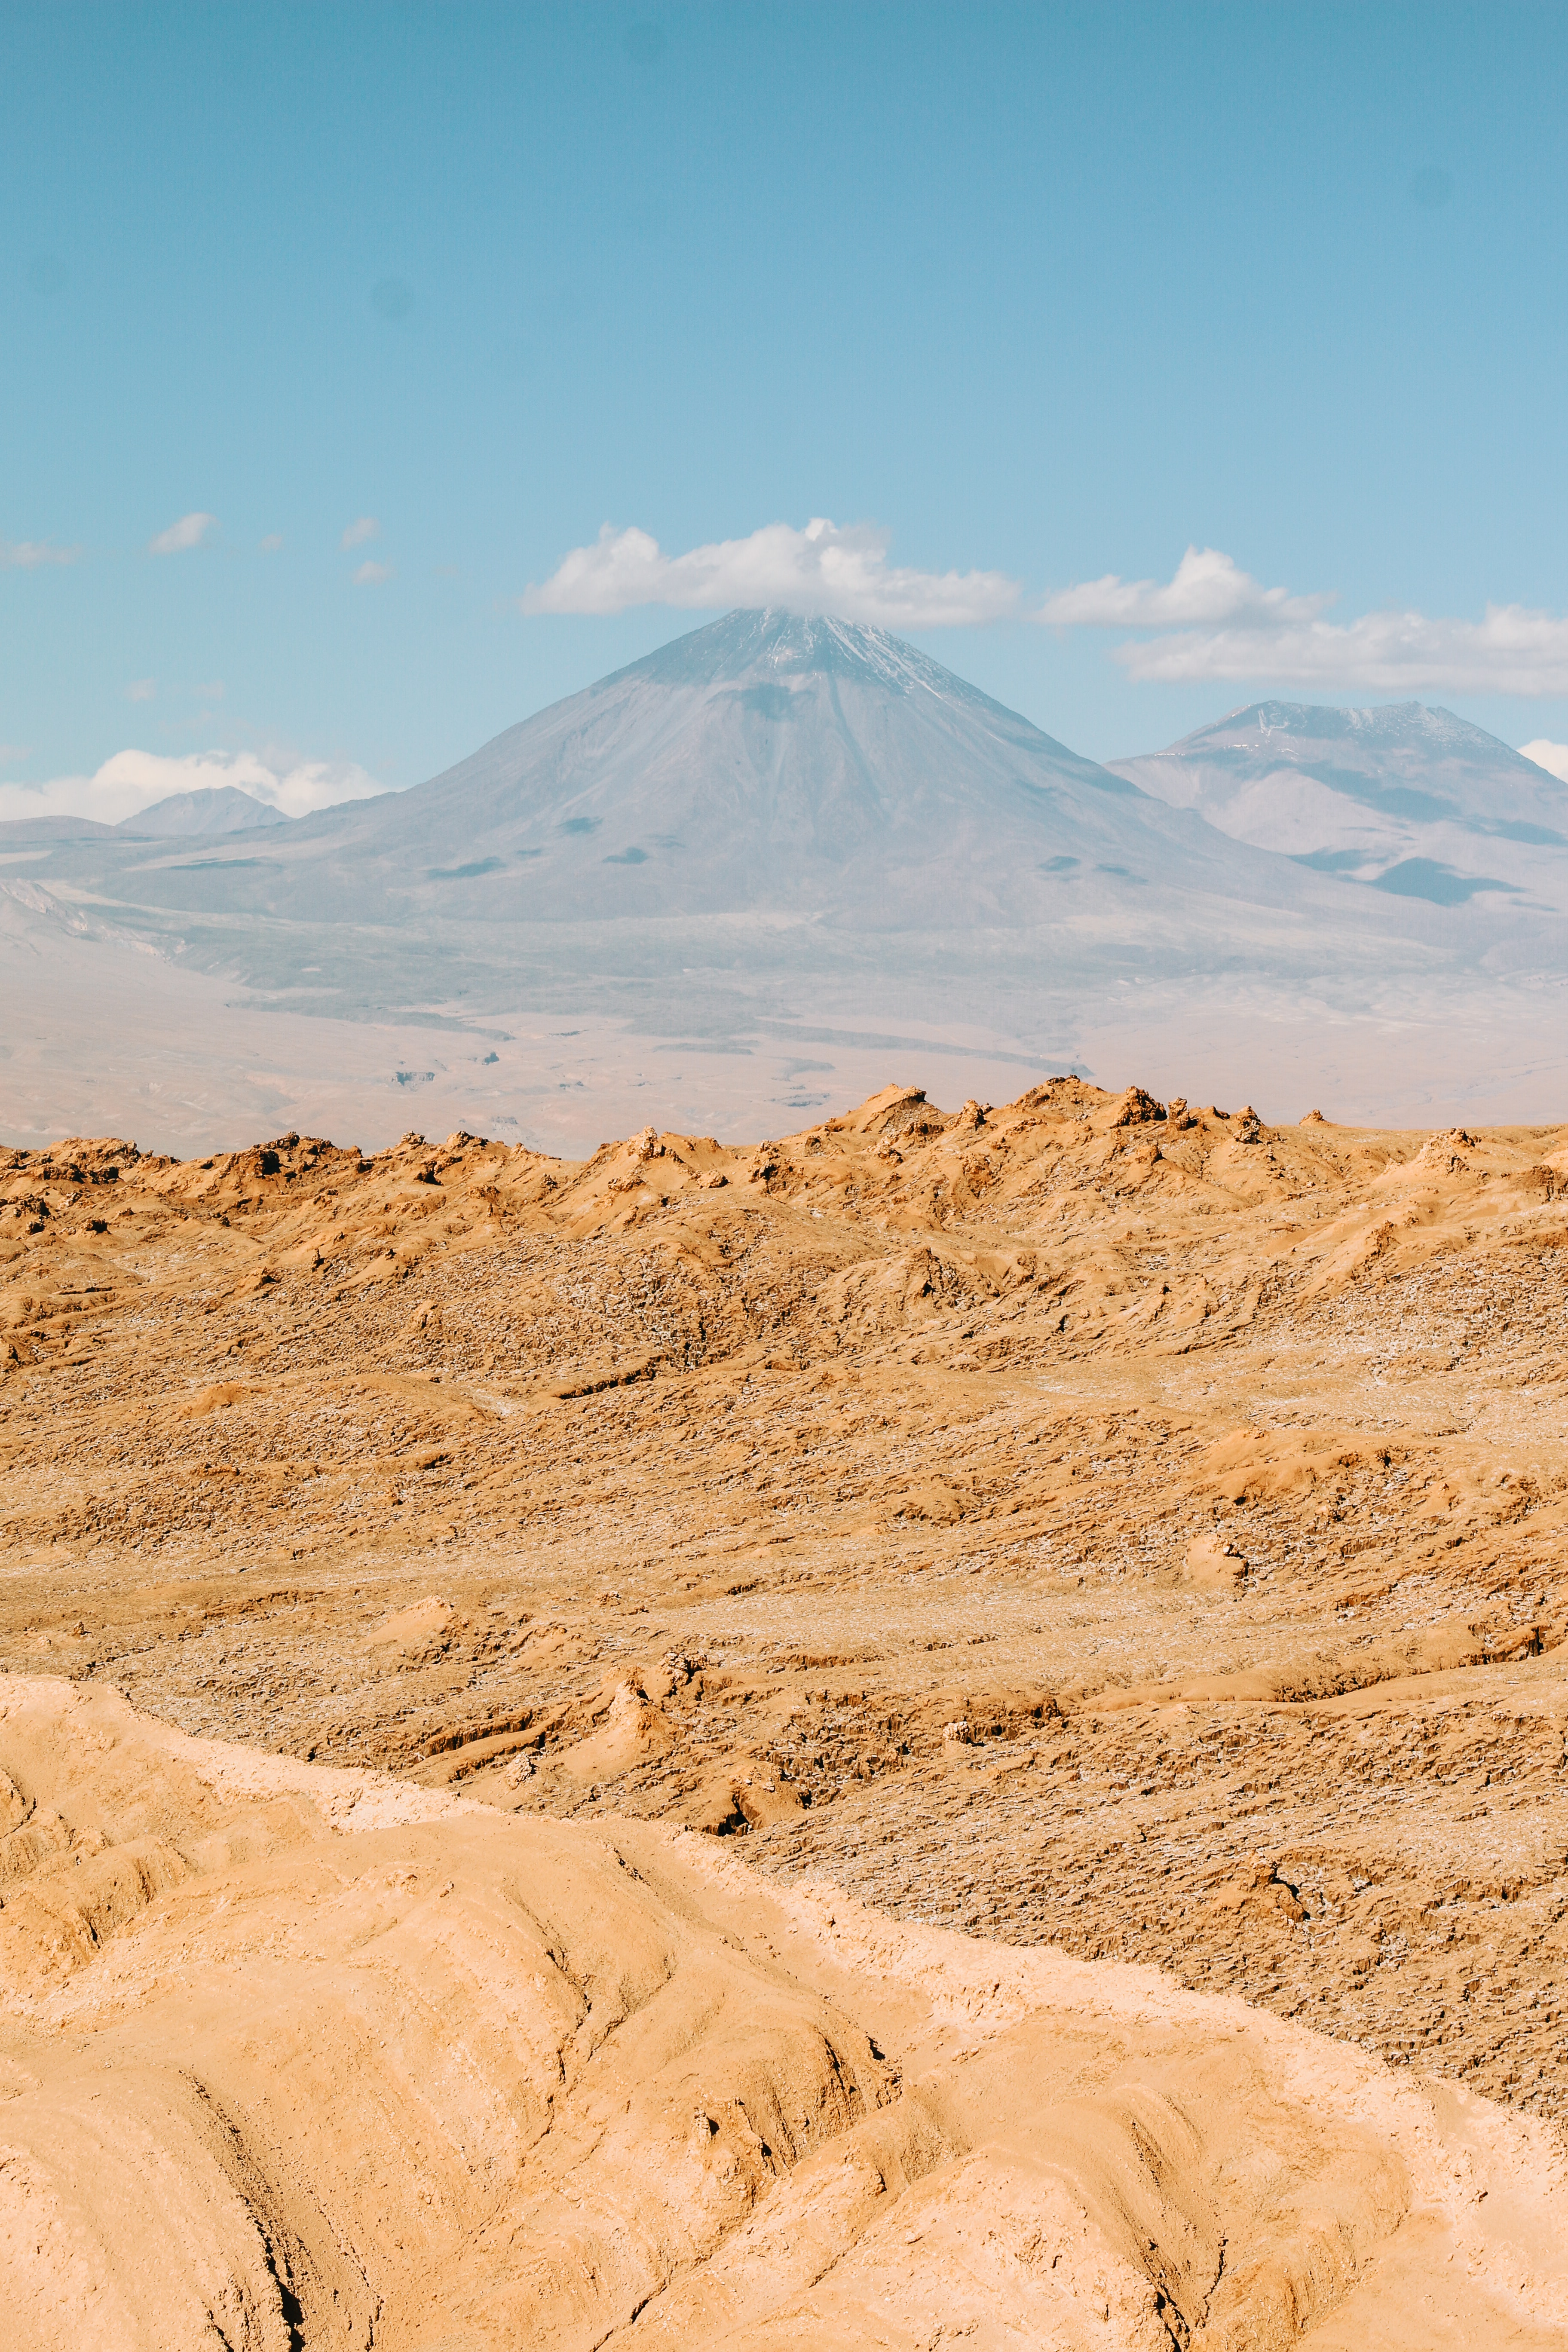 Free HD volcano, nature, landscape, mountains, clouds, desert